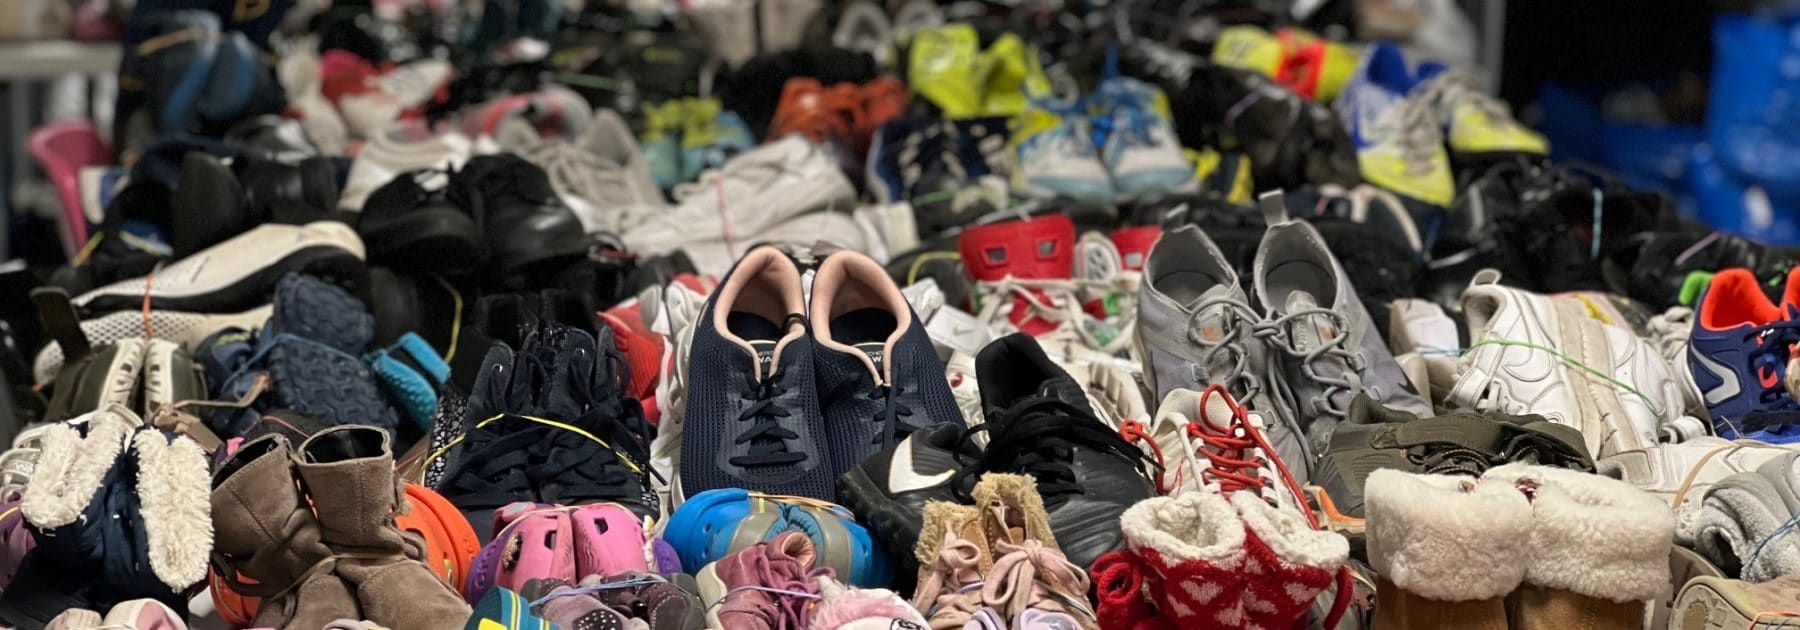 579 Pairs of Sal’s Shoes off to new feet